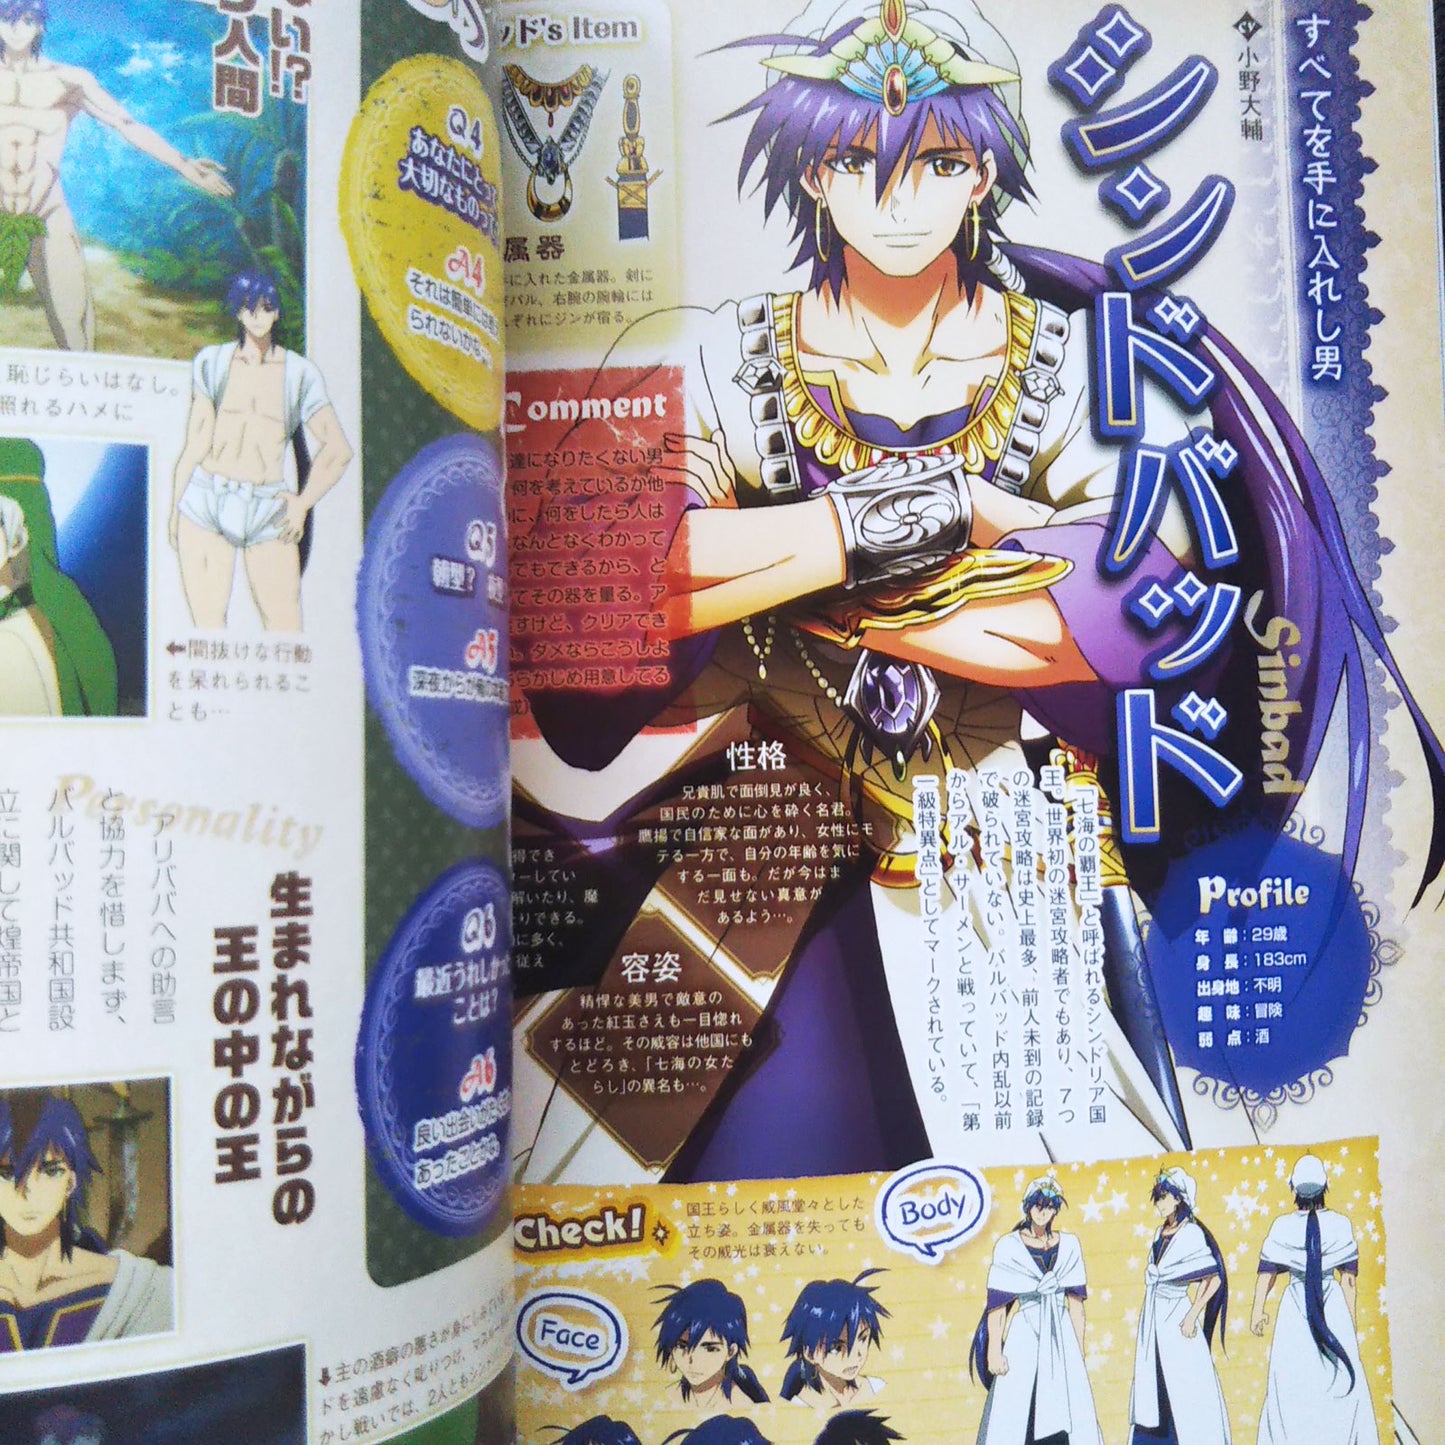 TV Animation Magi The Labyrinth of Magic 1st Fan Book